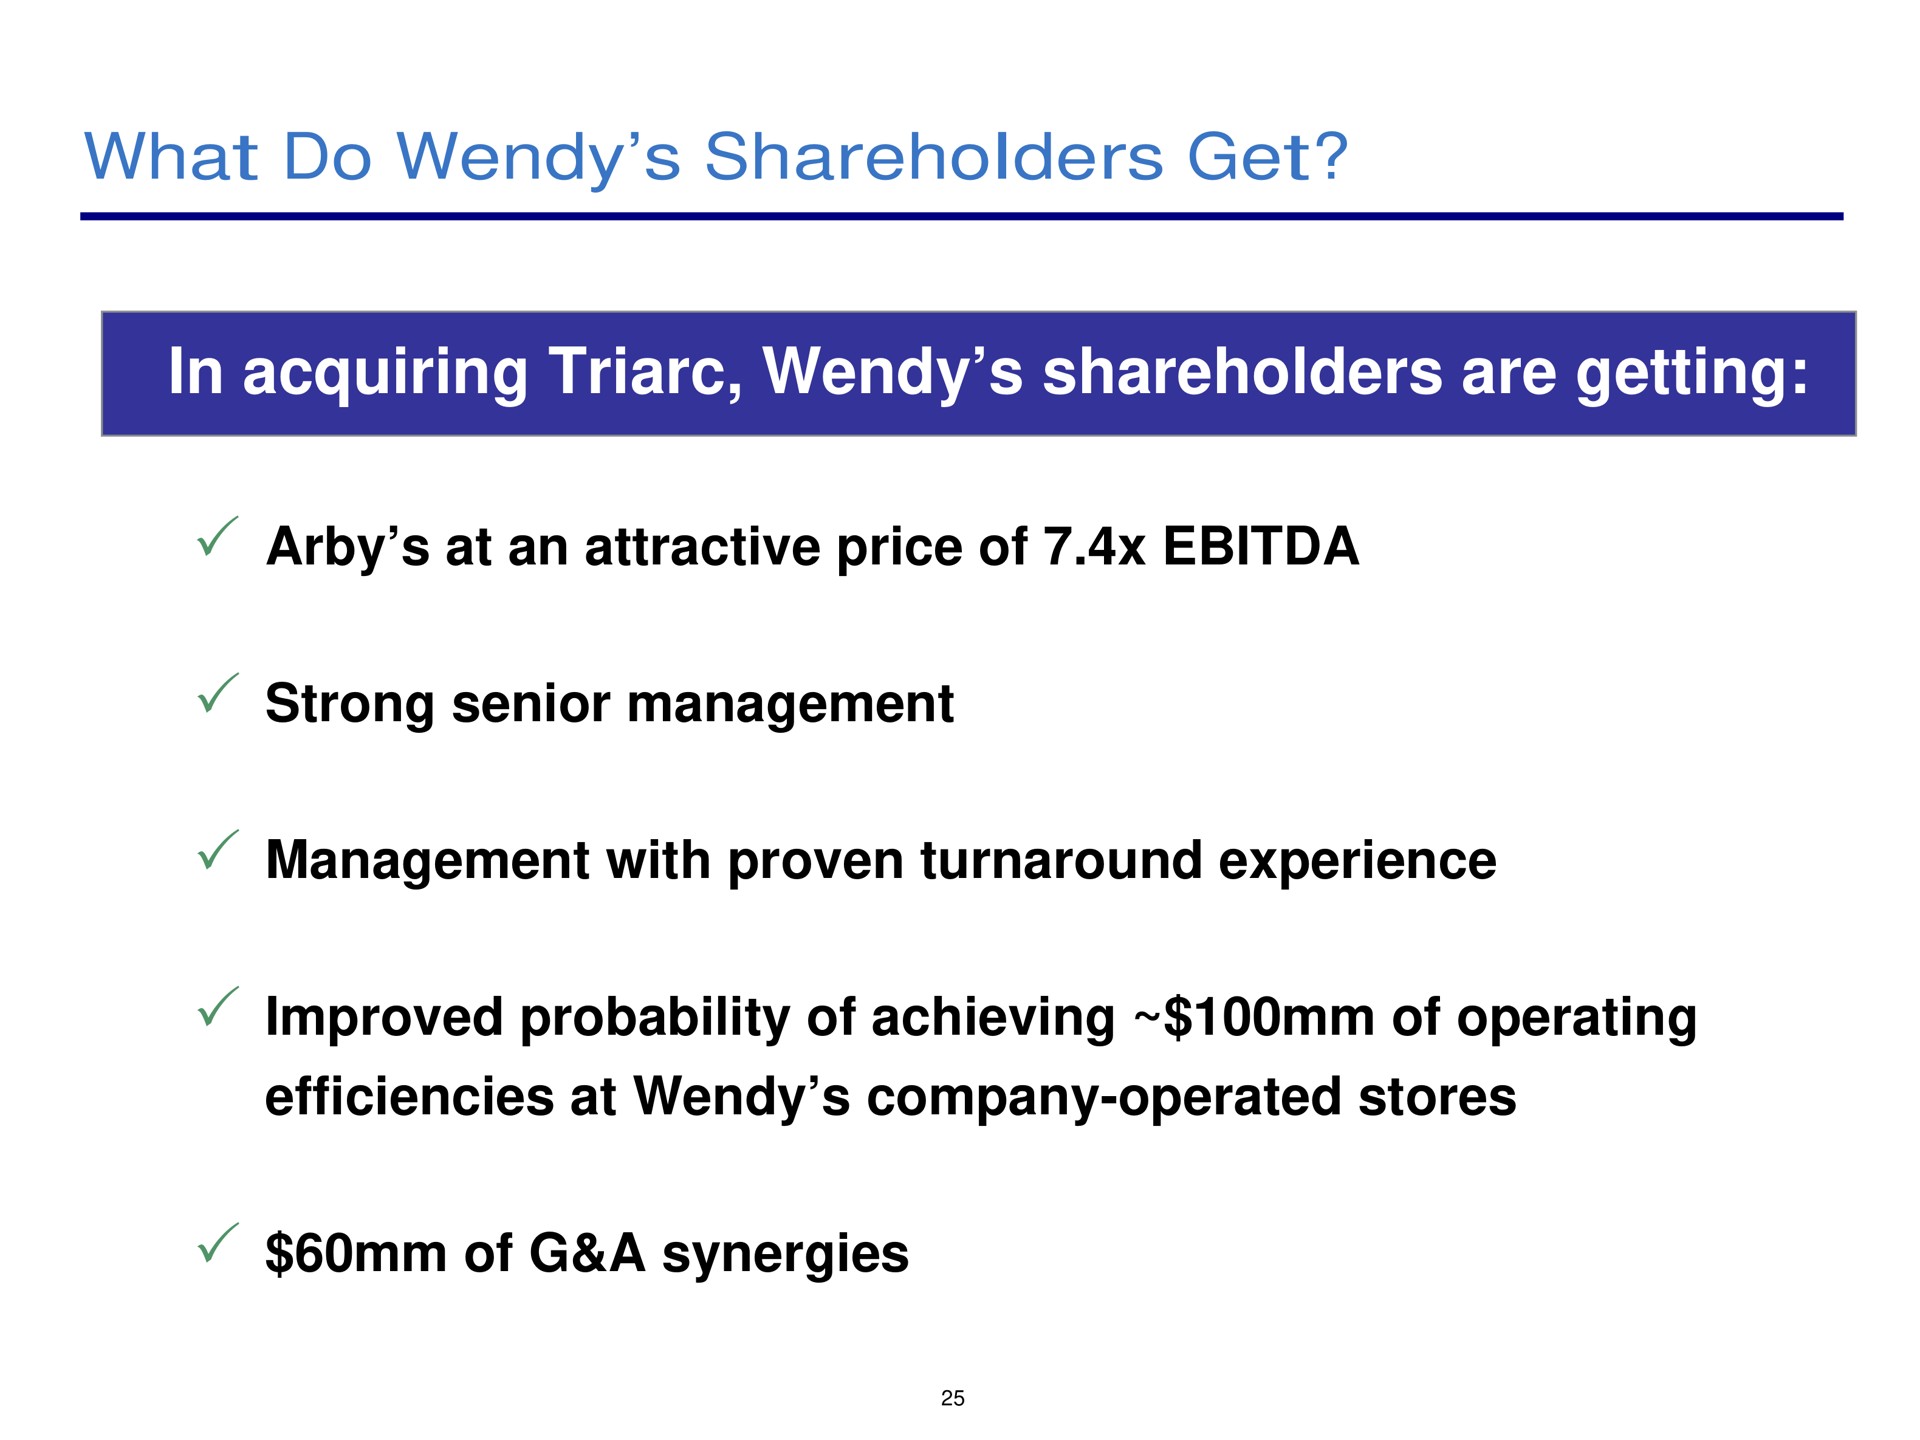 what do shareholders get in acquiring shareholders are getting at an attractive price of strong senior management management with proven turnaround experience improved probability of achieving of operating efficiencies at company operated stores of a synergies | Pershing Square